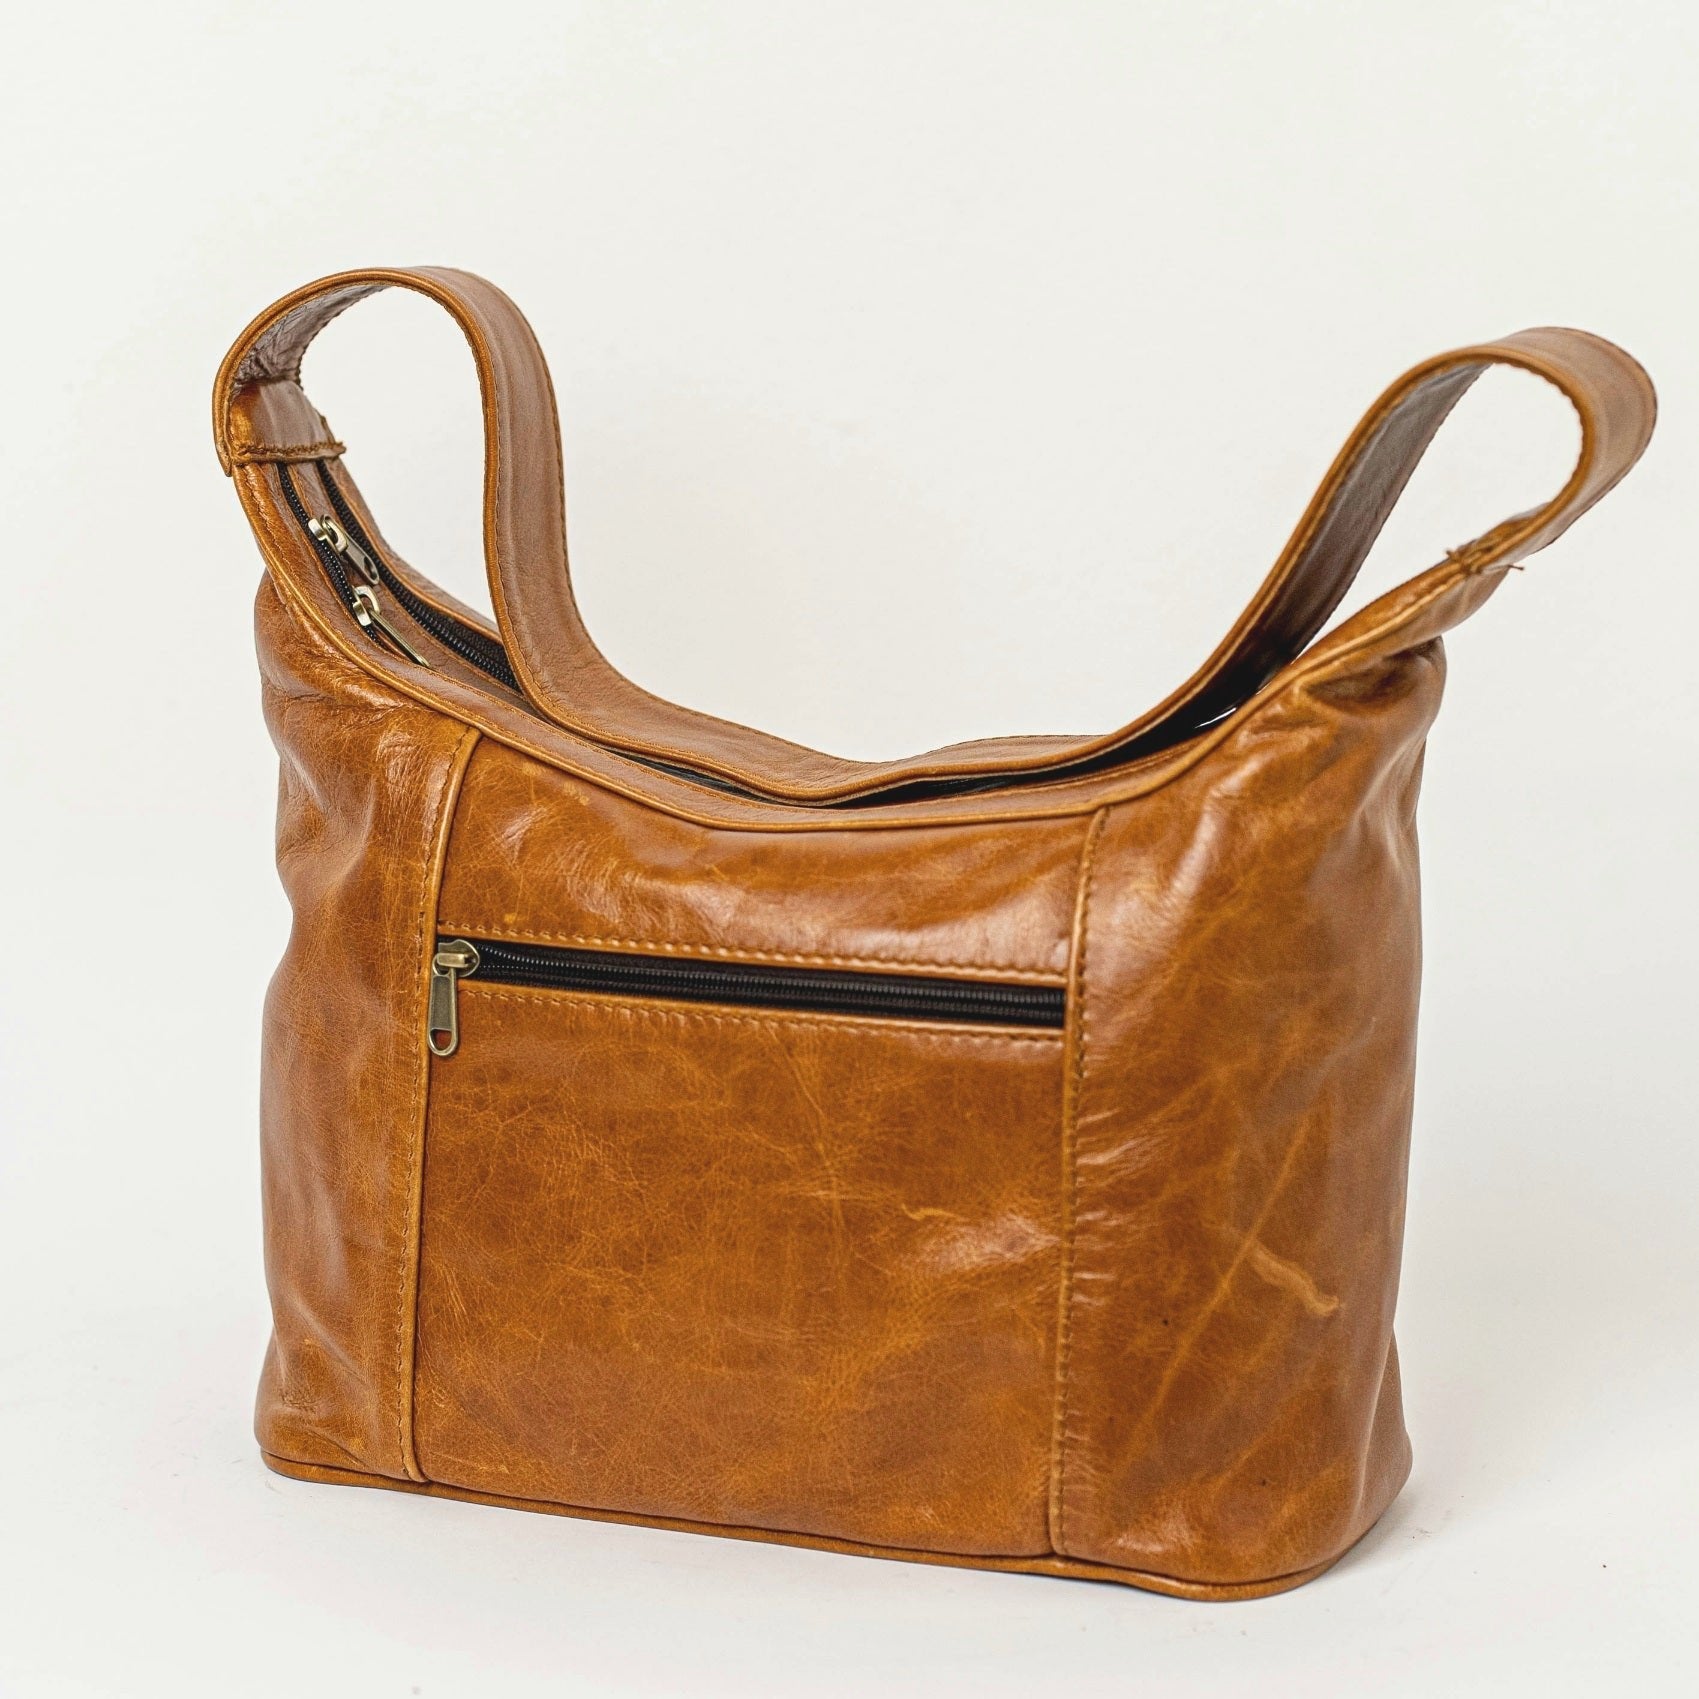 Gb7 leather bags with flap back side in light tan made by cape Masai Leather